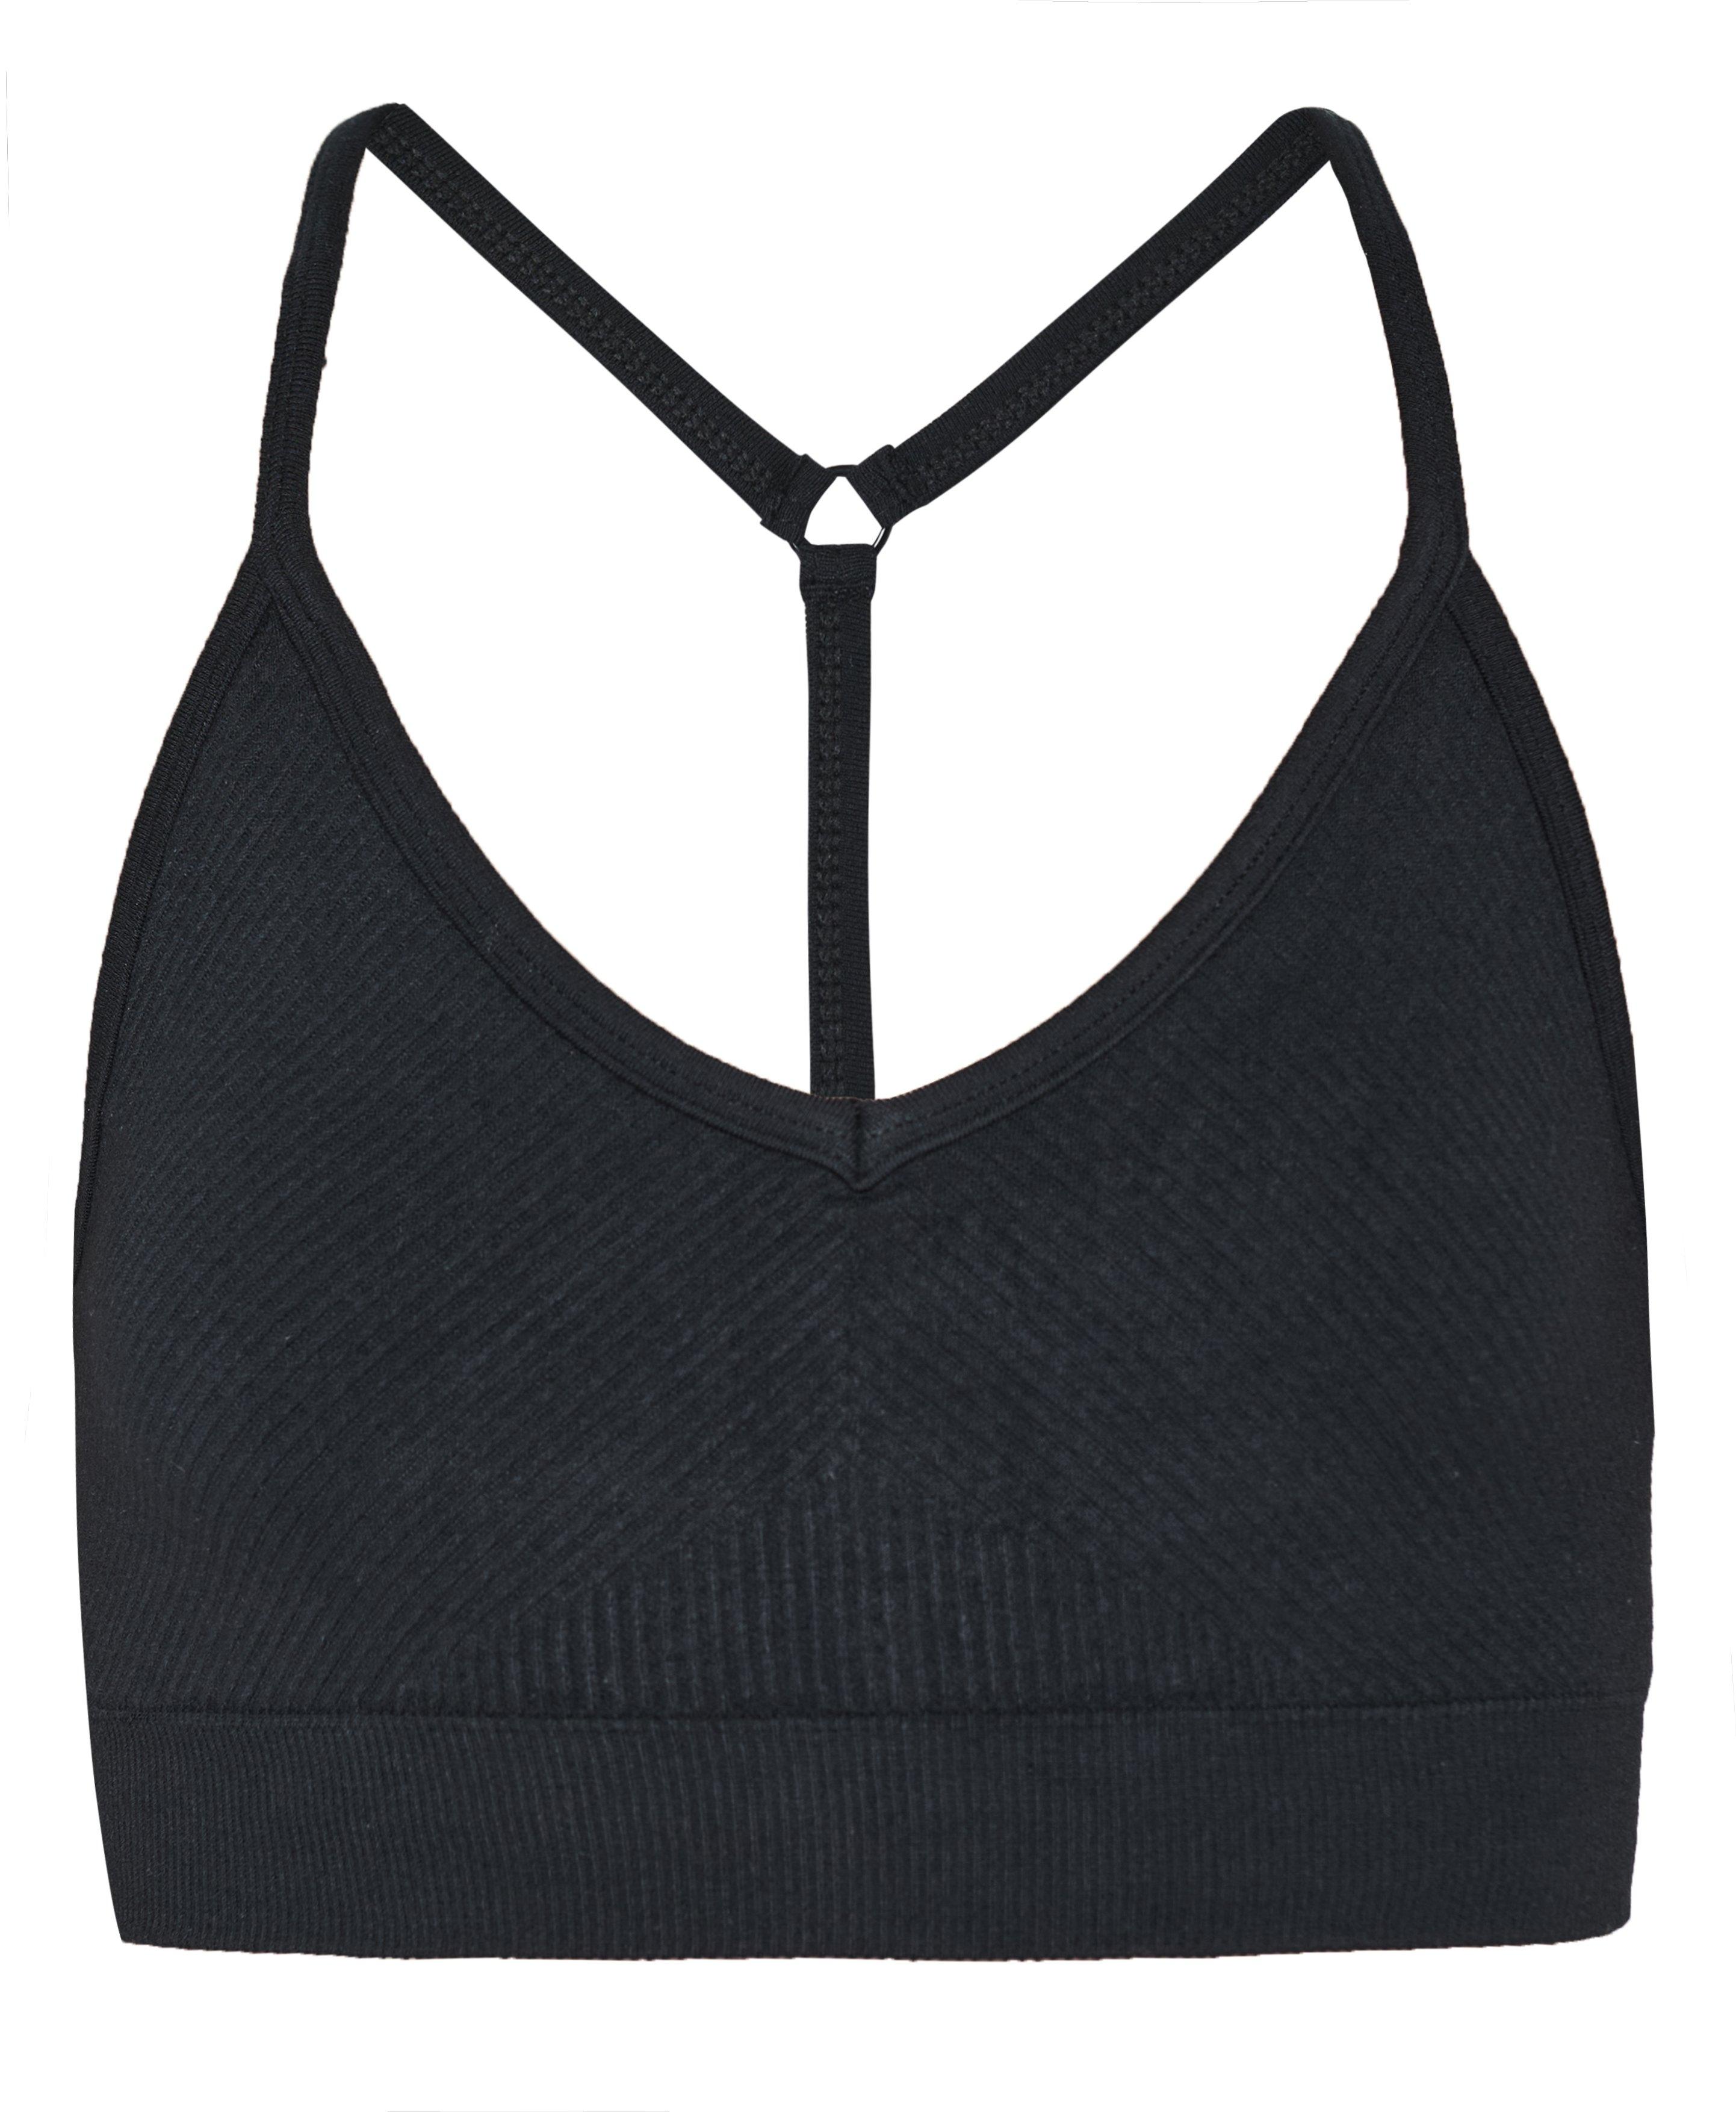 Bellissima Top Fitness Running Yoga Seamless Women's Sports Bra Made in  Italy (Black, S/M) at  Women's Clothing store